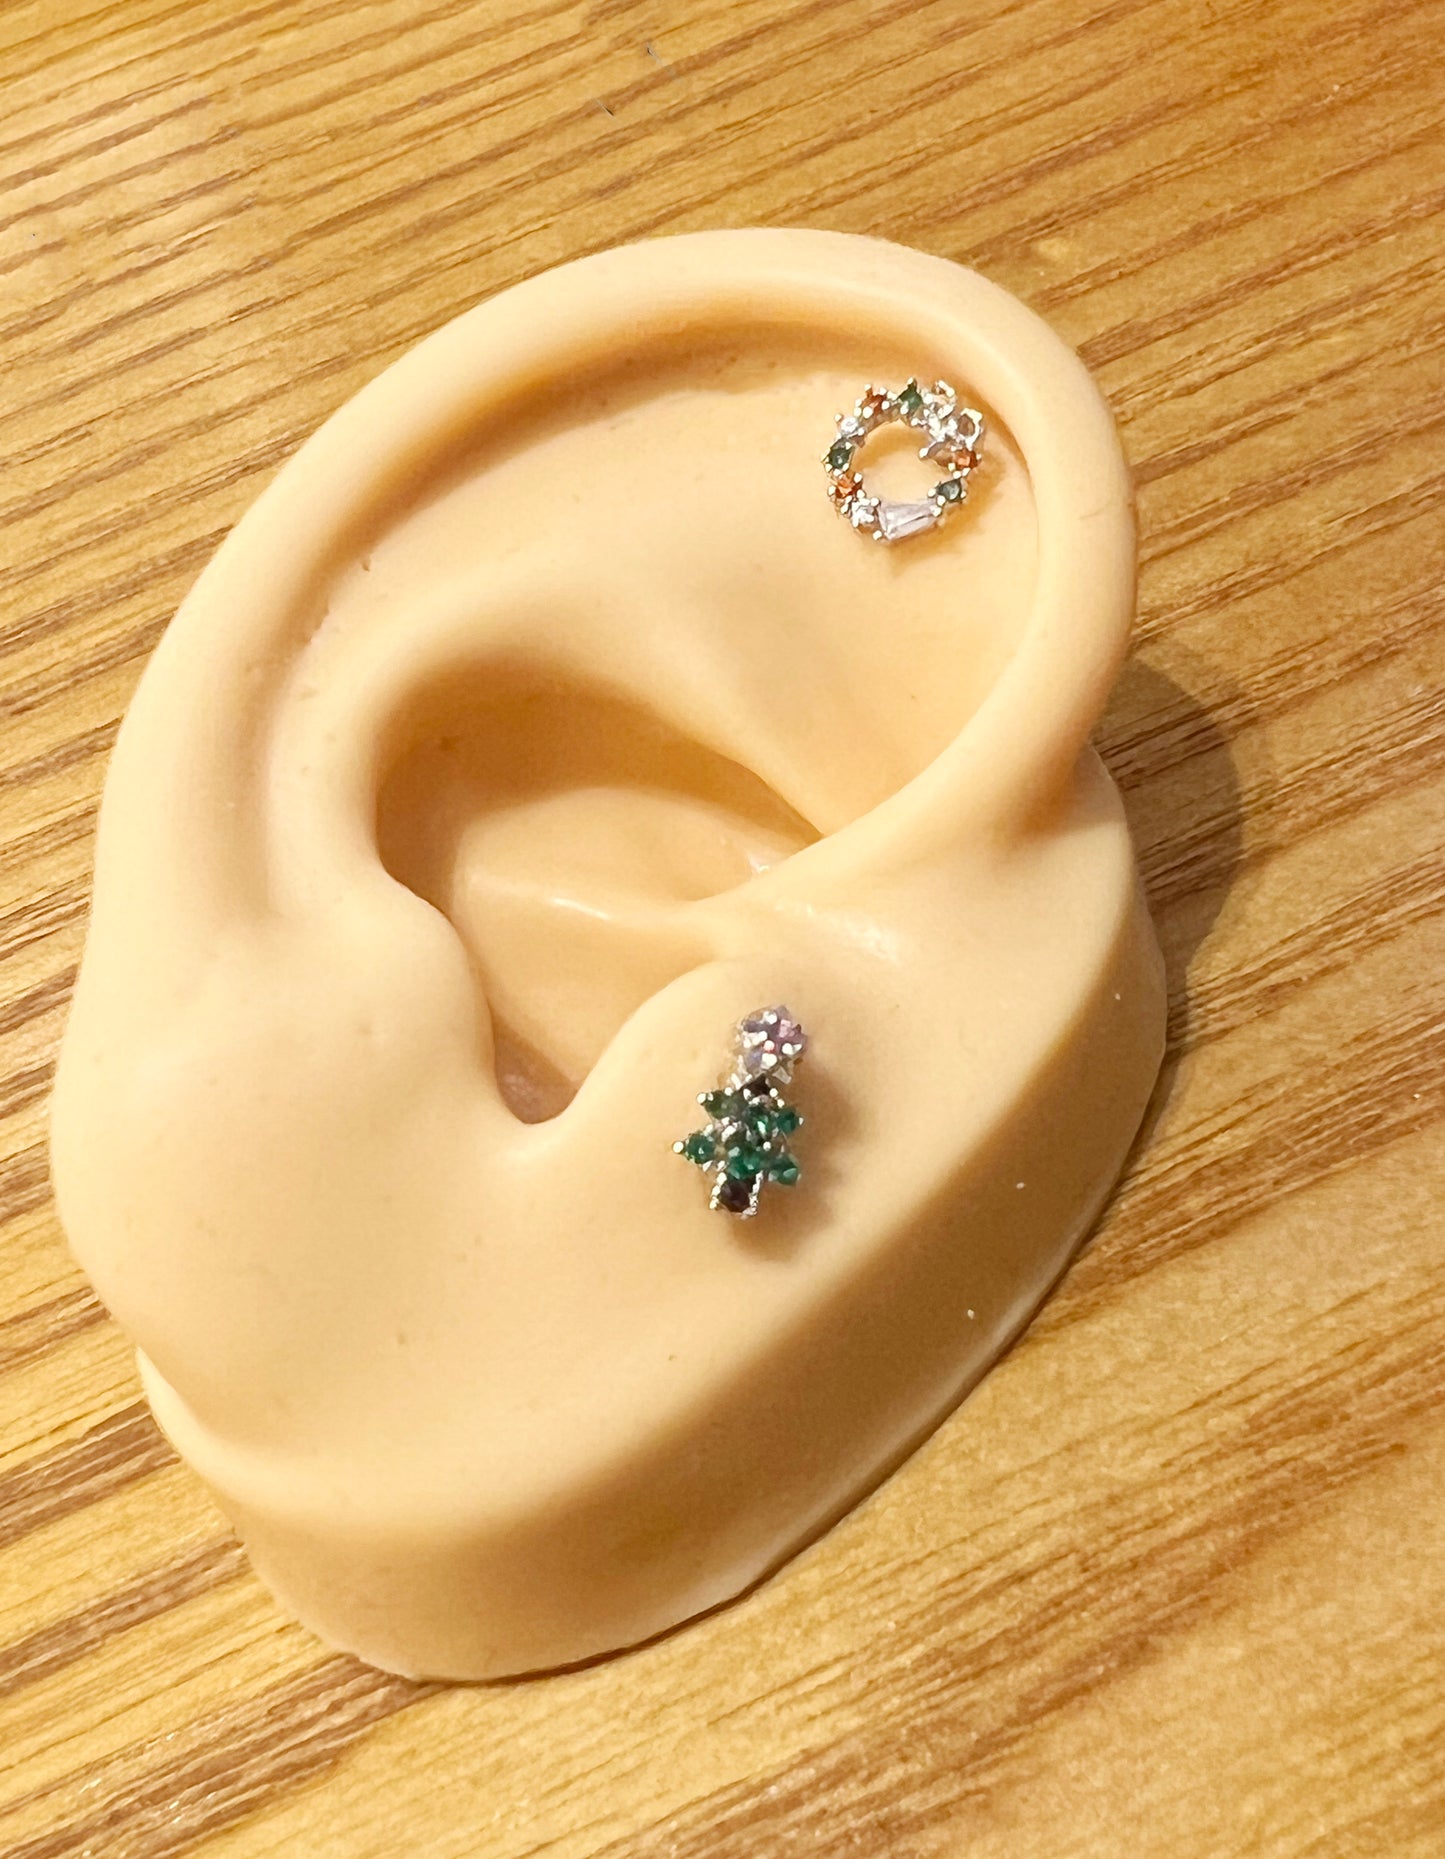 Cubic detailed Tiny Christmas tree and Christmas wreath Surgical Steel screw back ball Cartilage earrings, Barbells Ear Piercing, Cartilage Piercing